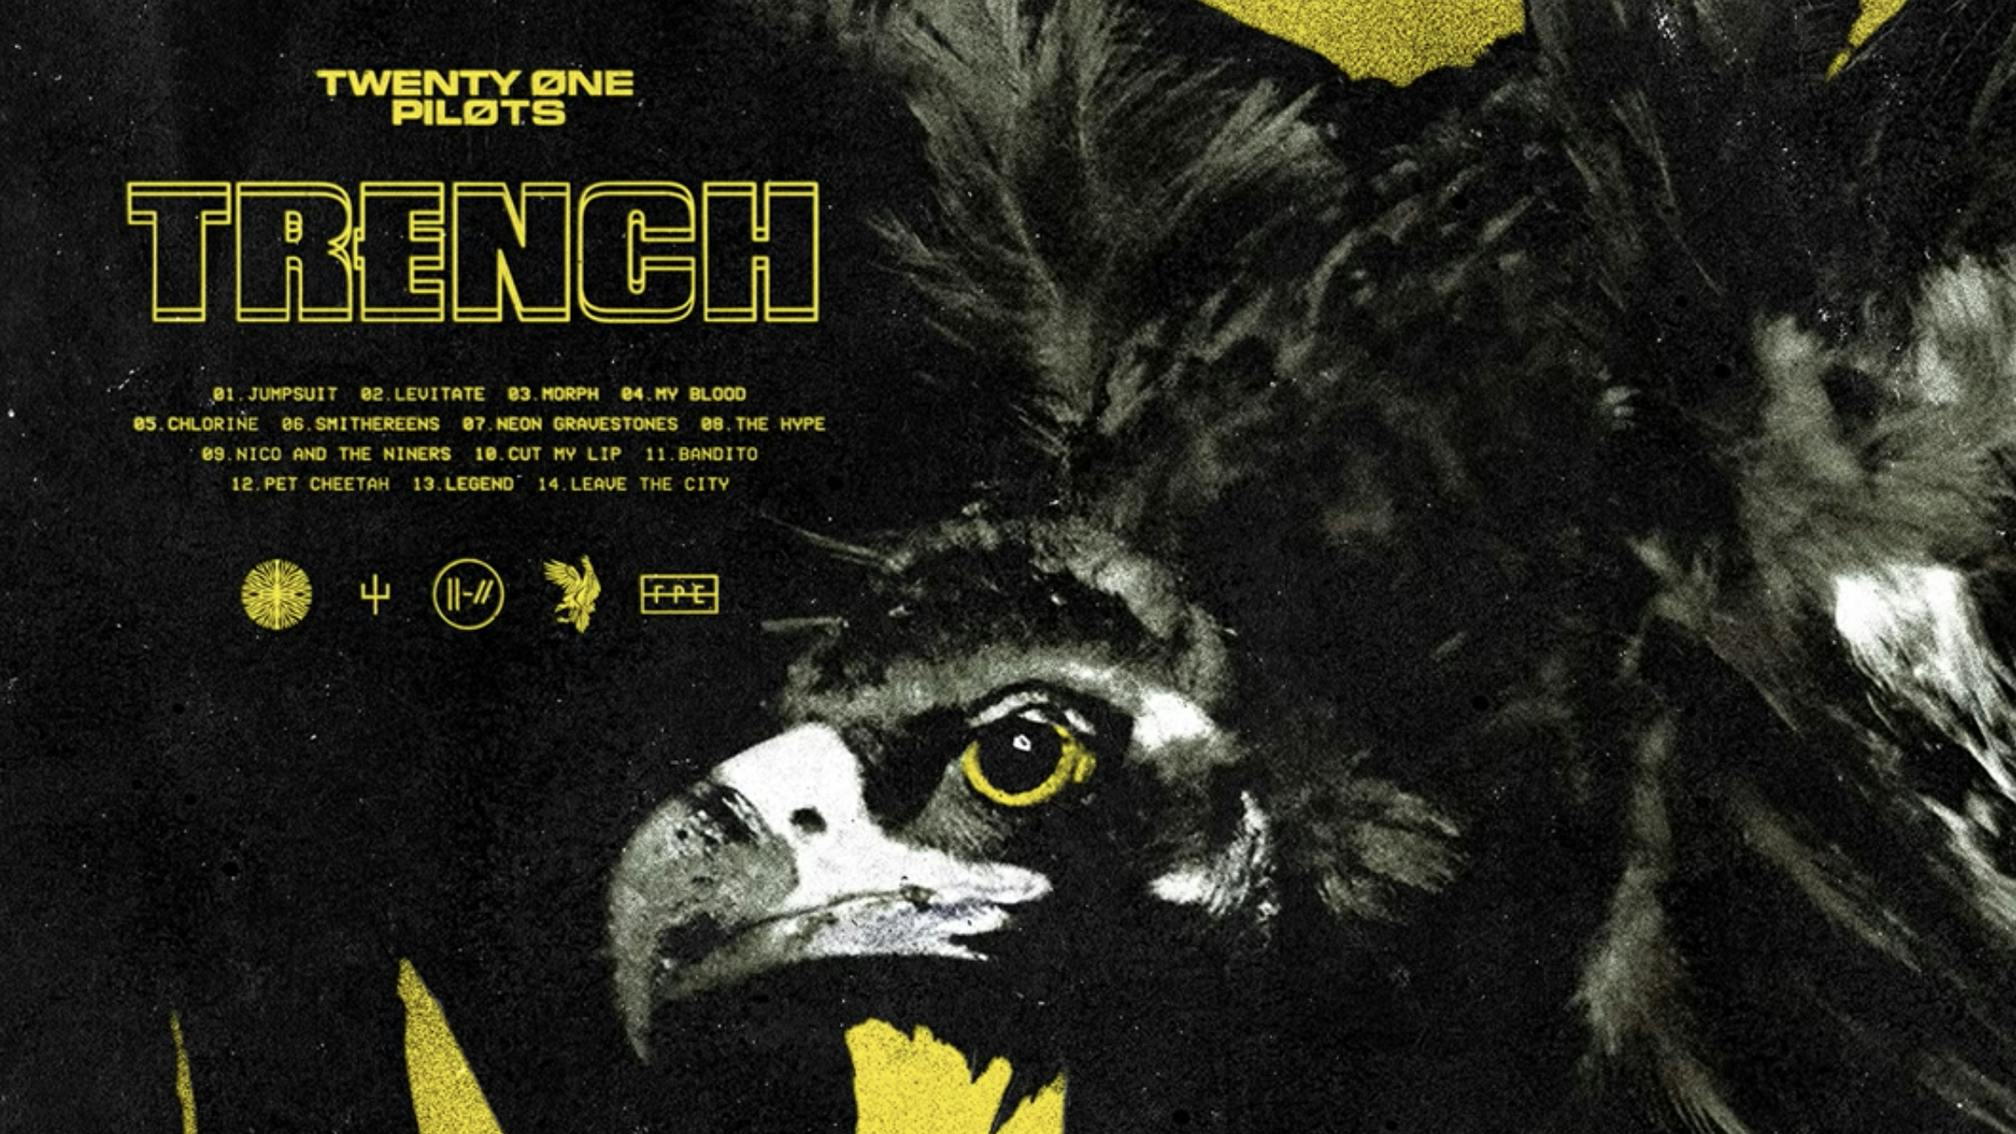 Trench: The story of twenty one pilots’ most ambitious album ever